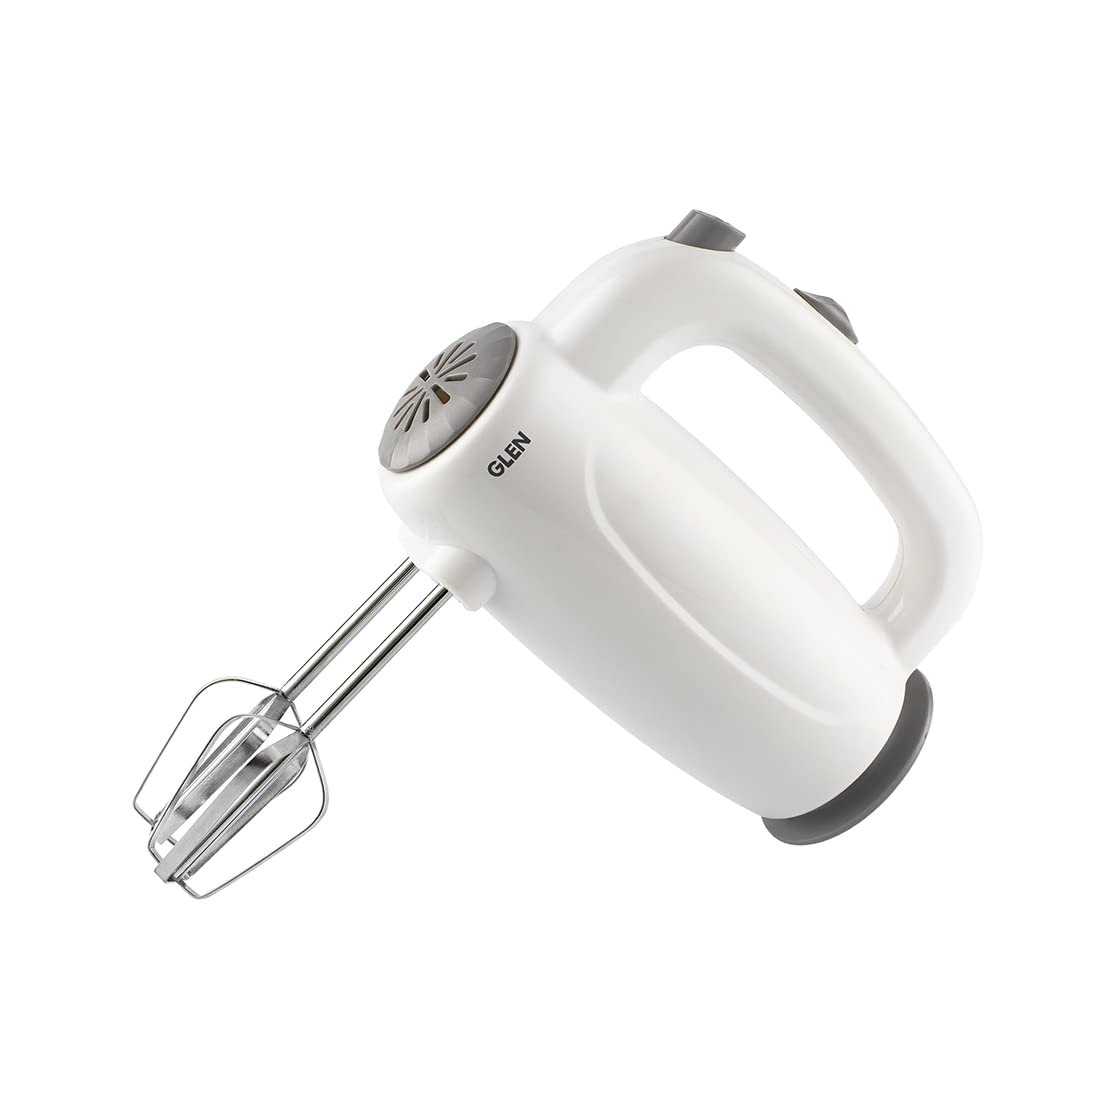 Glen Electric Hand Mixer 125 W 2 Beaters with 5 Speed Settings - White (4059)